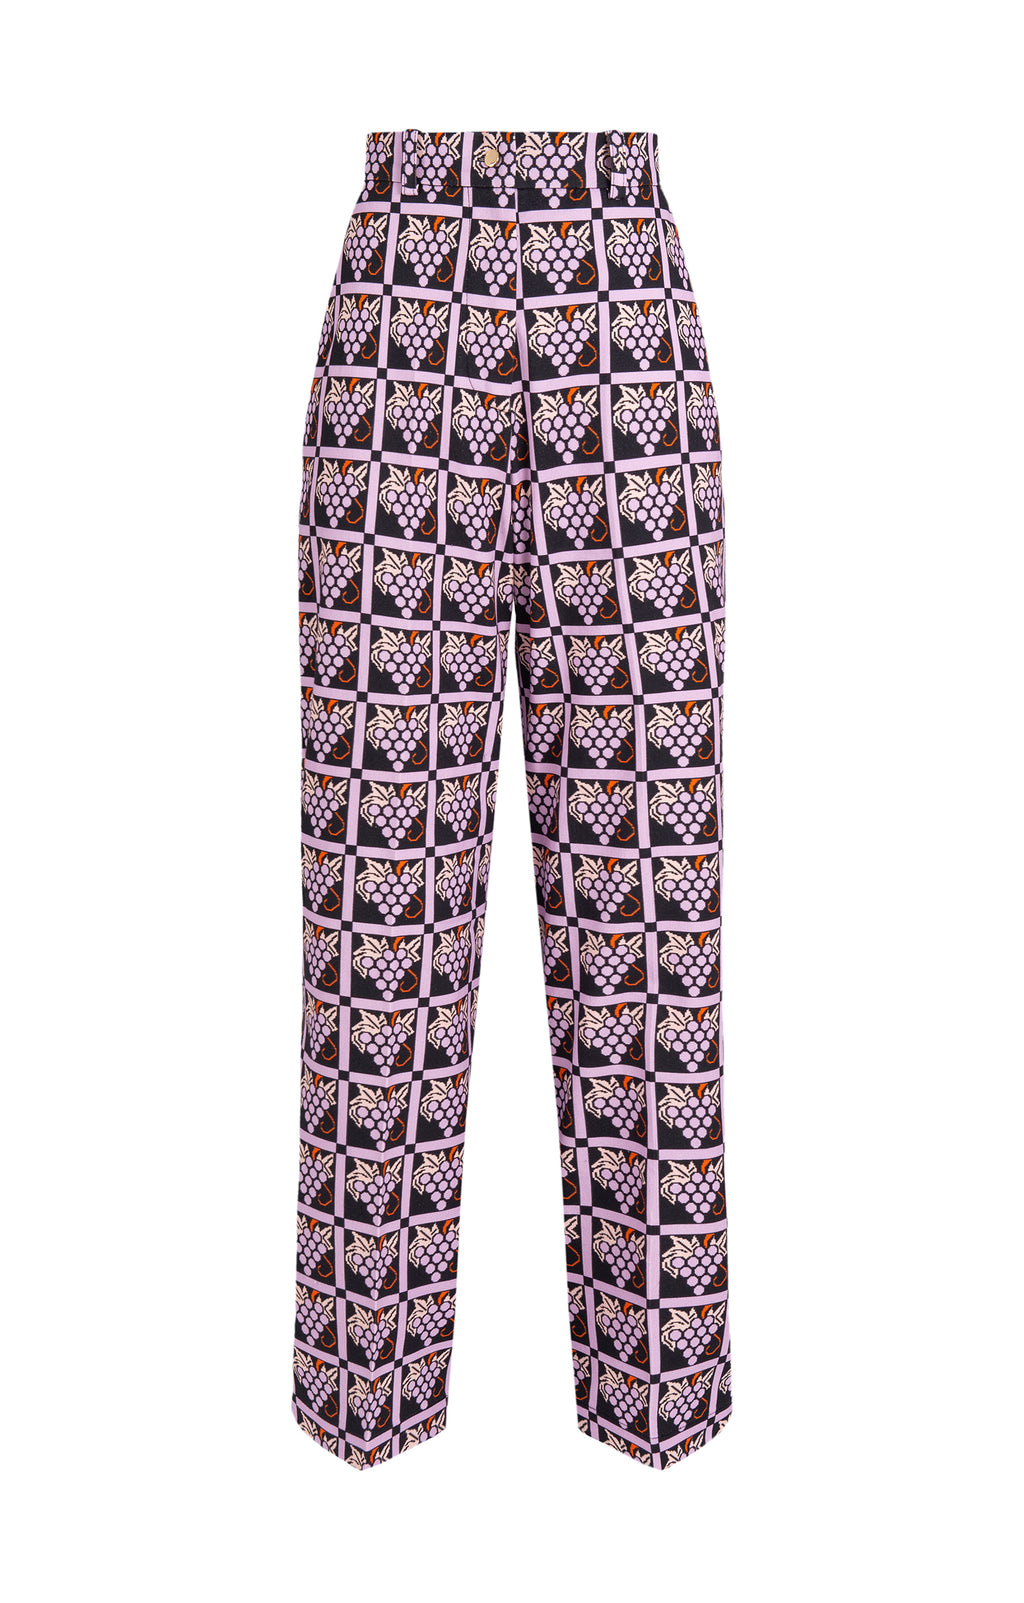 FURMINT high waisted chinos 'pixel grapes'